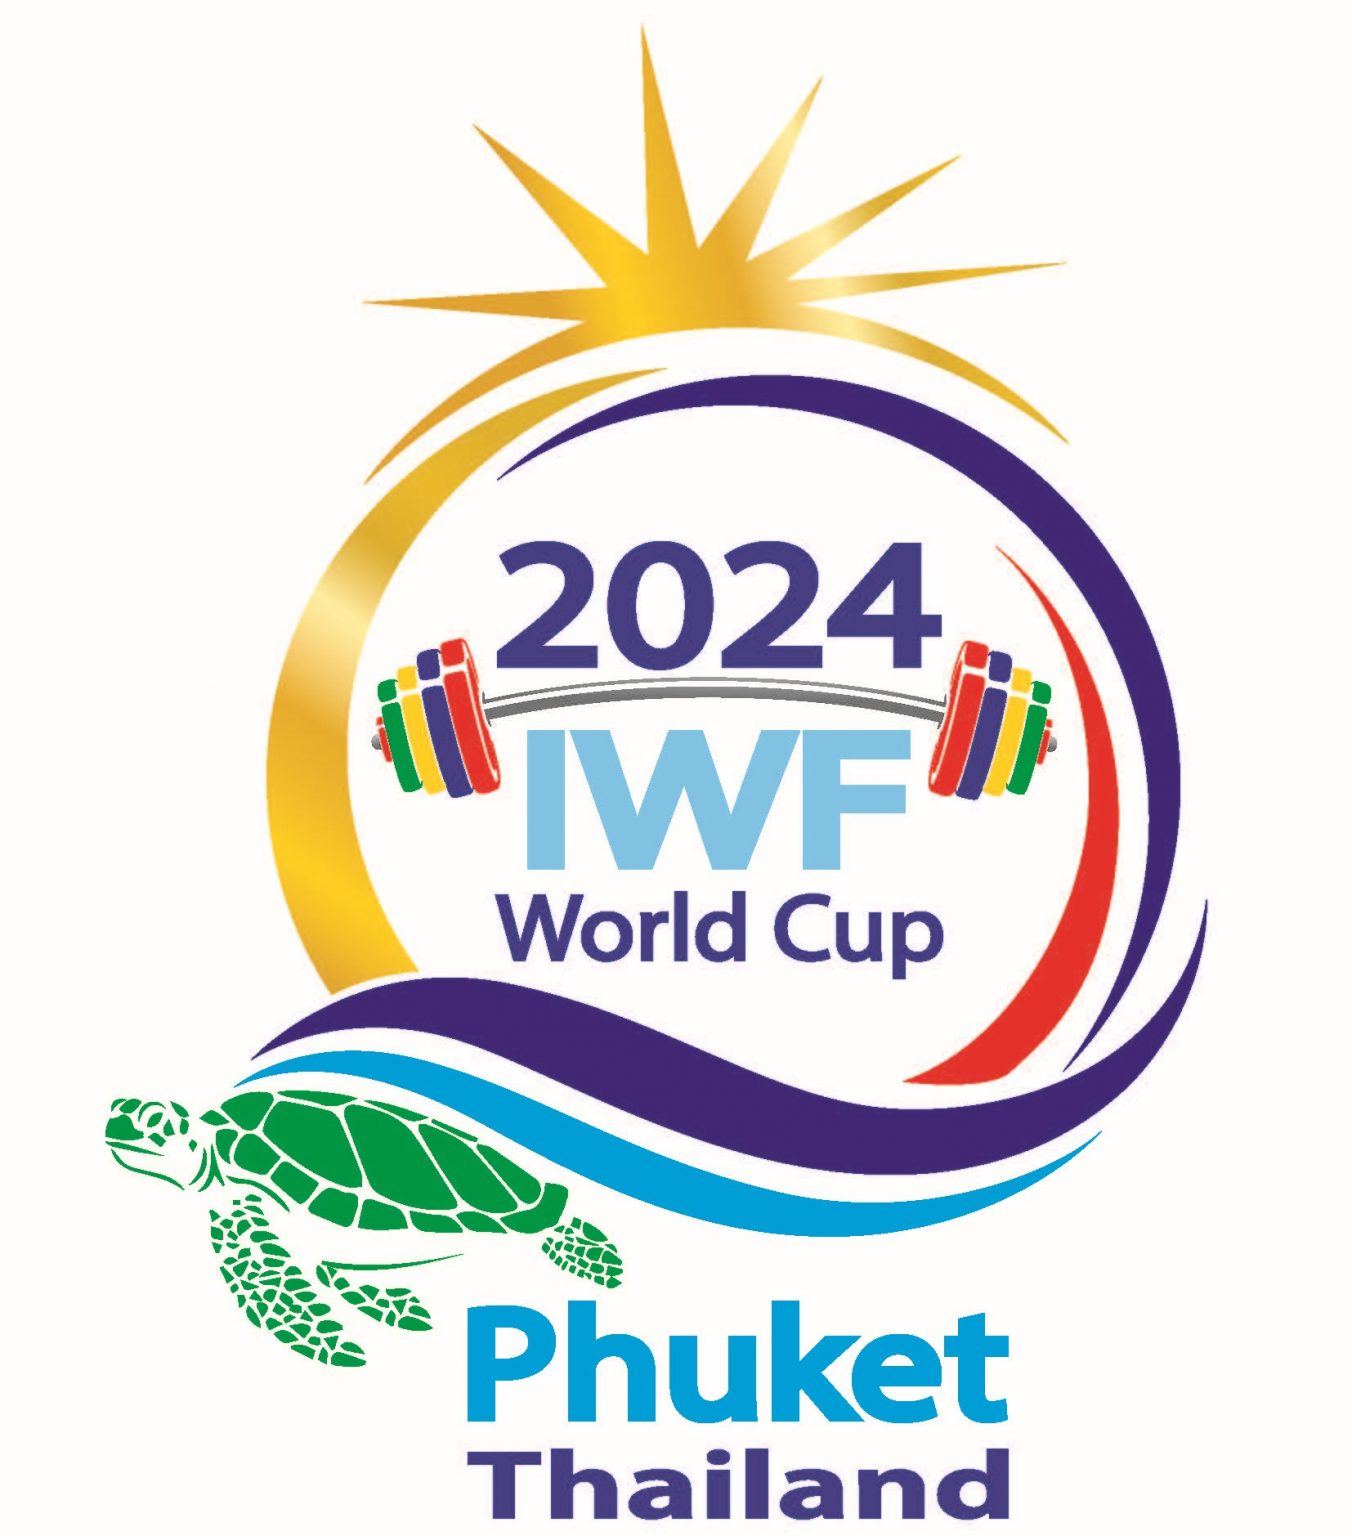 Webpage for the IWF World Cup in Phuket already available